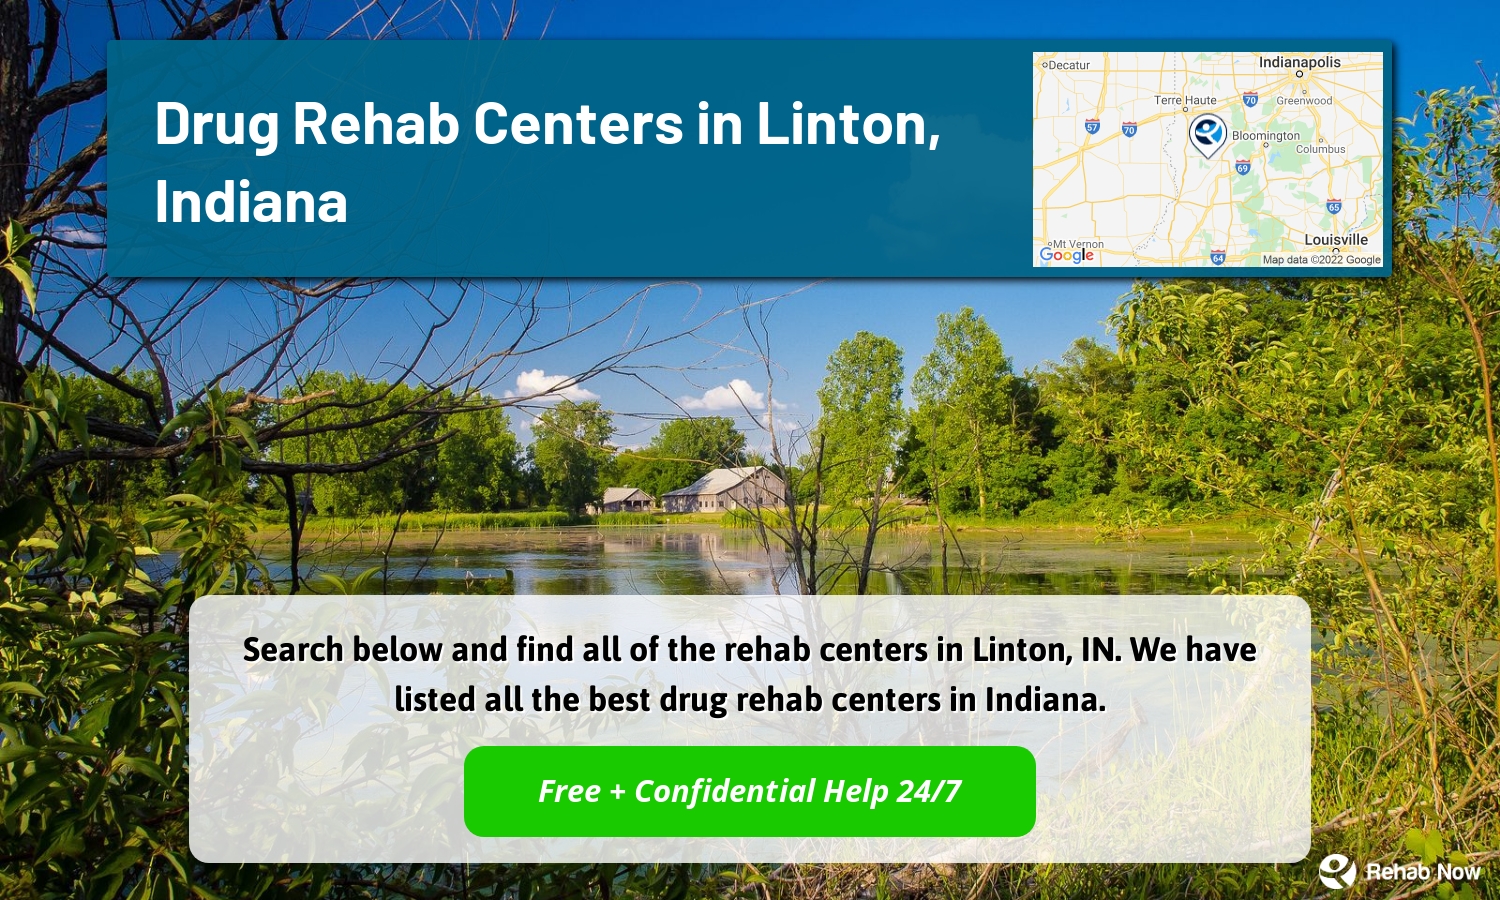 Search below and find all of the rehab centers in Linton, IN. We have listed all the best drug rehab centers in Indiana.